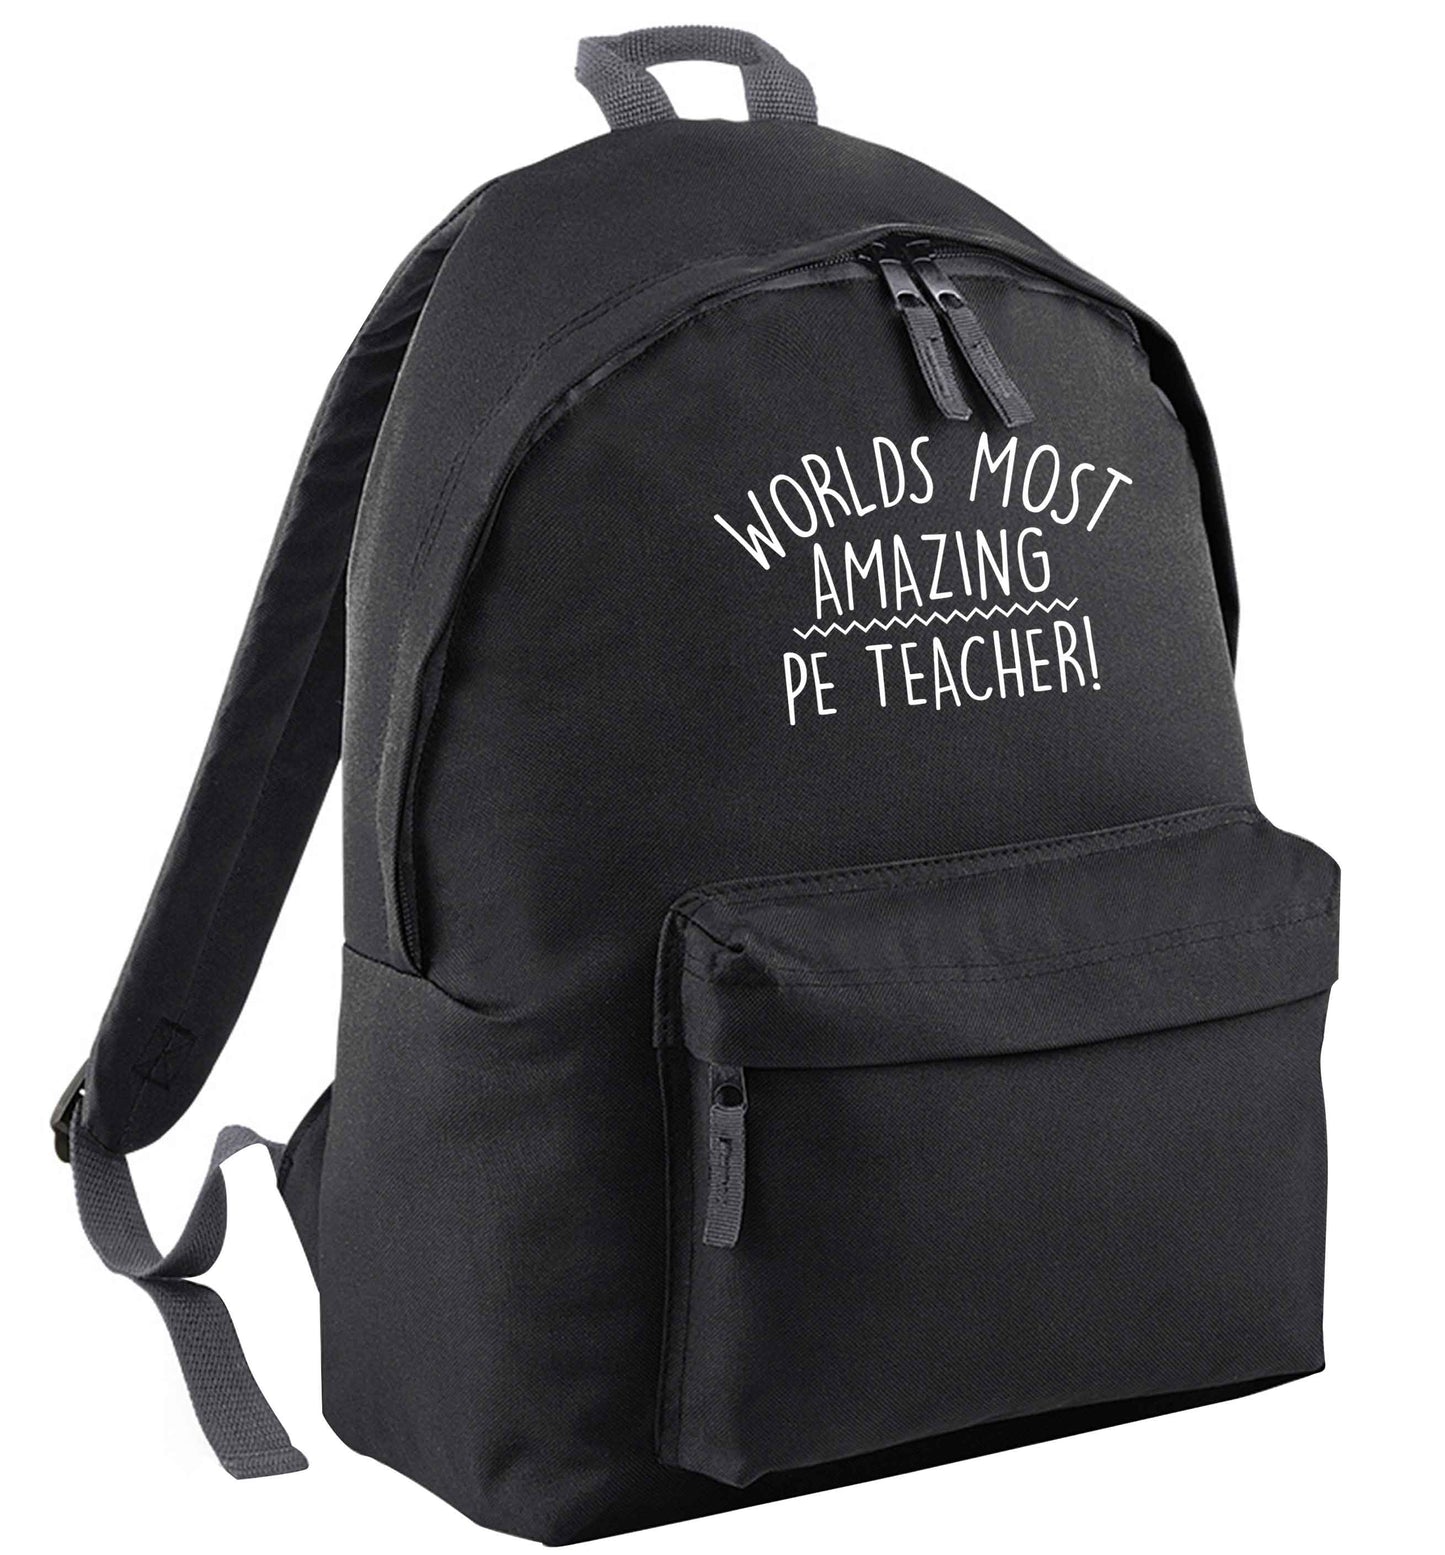 Worlds most amazing PE teacher | Adults backpack